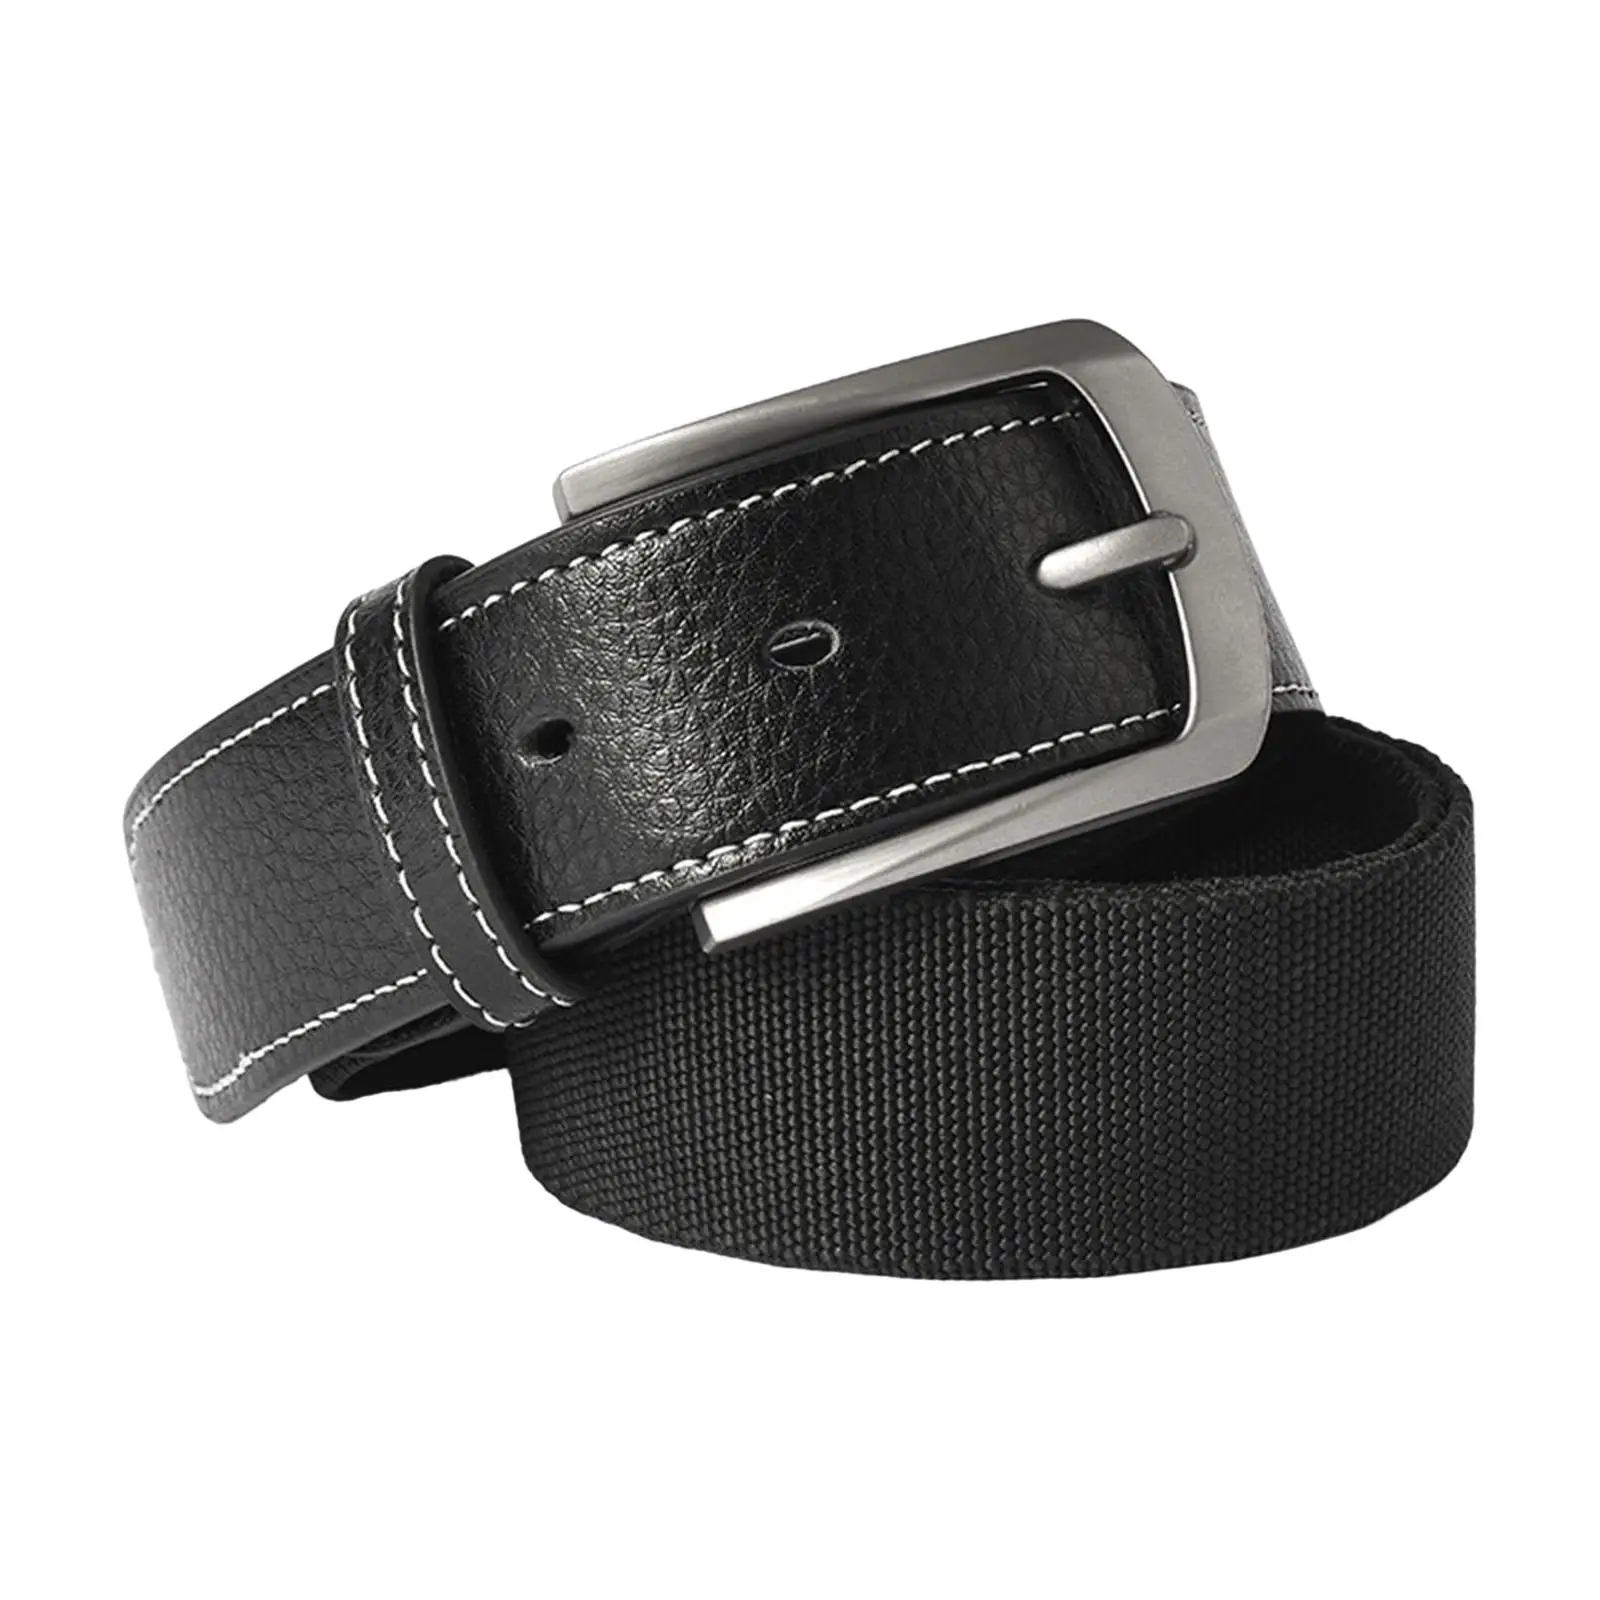 Men Belts Black Lightweight Versatile Stylish Casual 43inch Length Pin Buckle Waist Band for Street Pants Wedding Party Cosplay